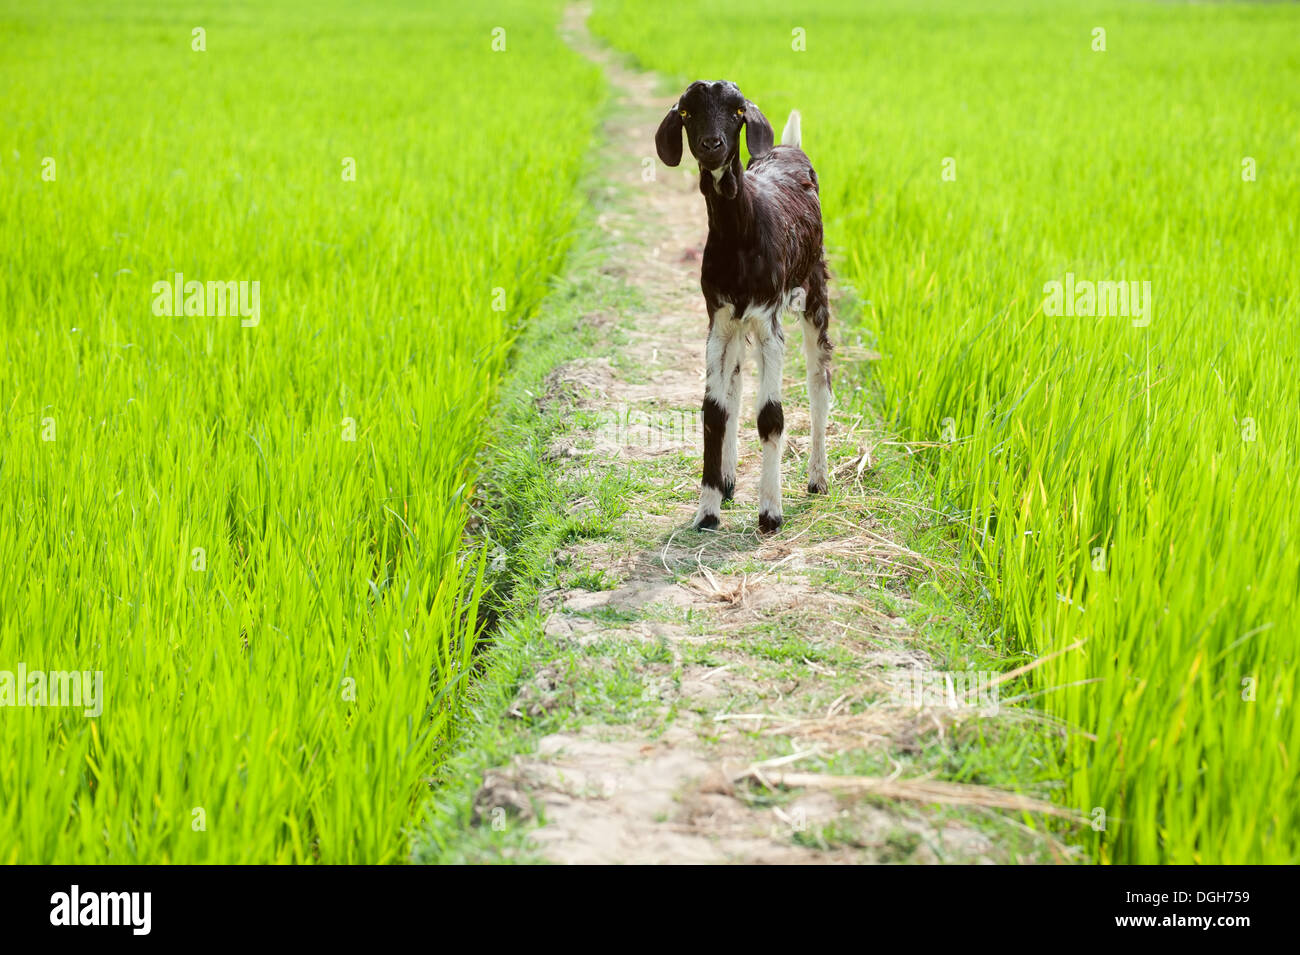 Farm animal. Baby goat playing at rice field. South India, Tamil Nadu Stock  Photo - Alamy